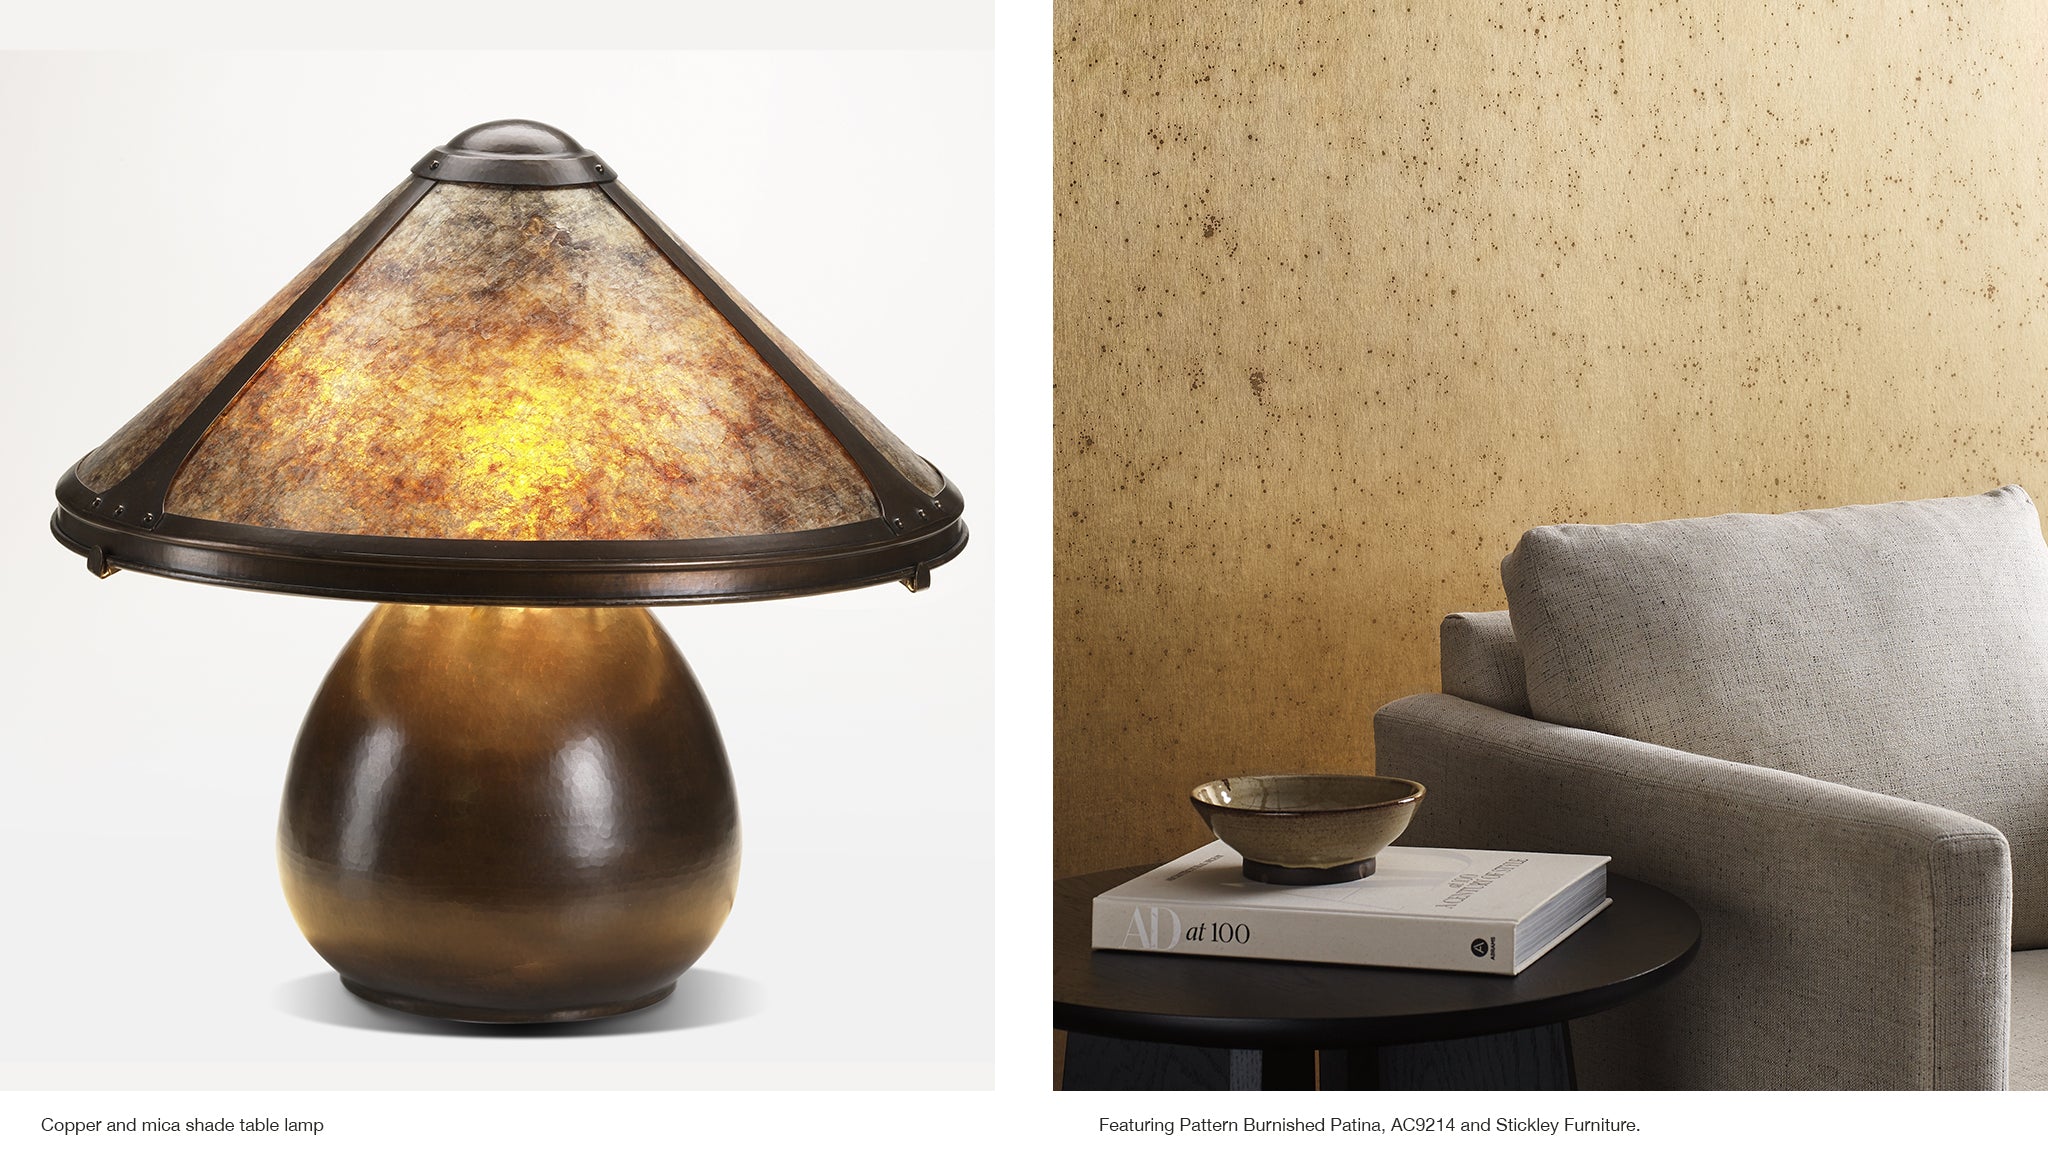 Copper and mica shade table lamp, Featuring Wallpaper Pattern Burnished Patina, AC9214, gold